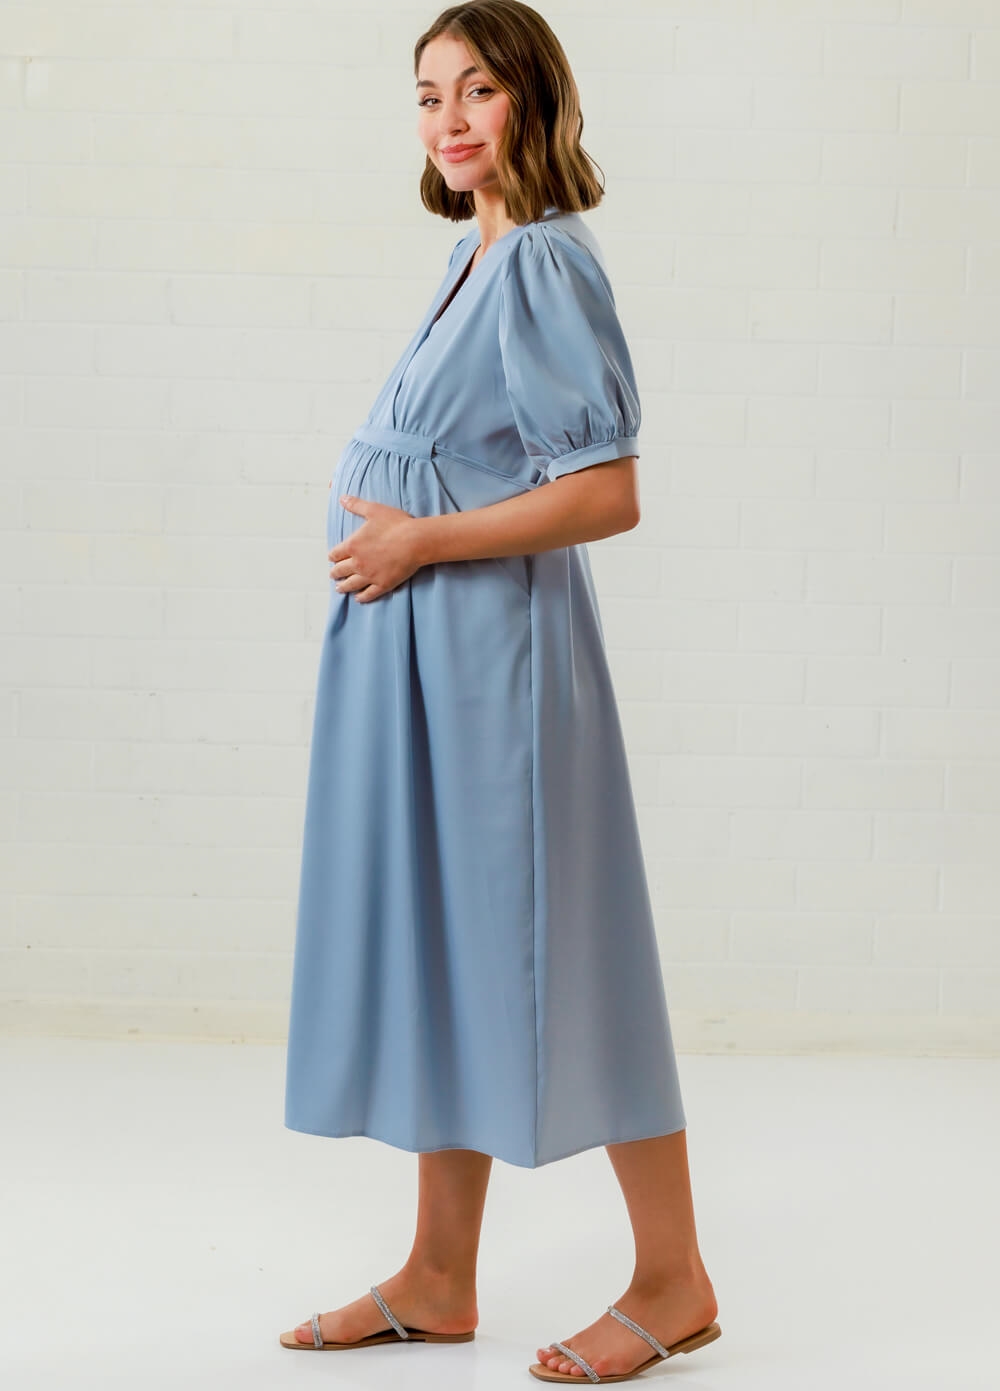 Lait & Co - Anna-Elea Maternity Cocktail Party Dress in Blue